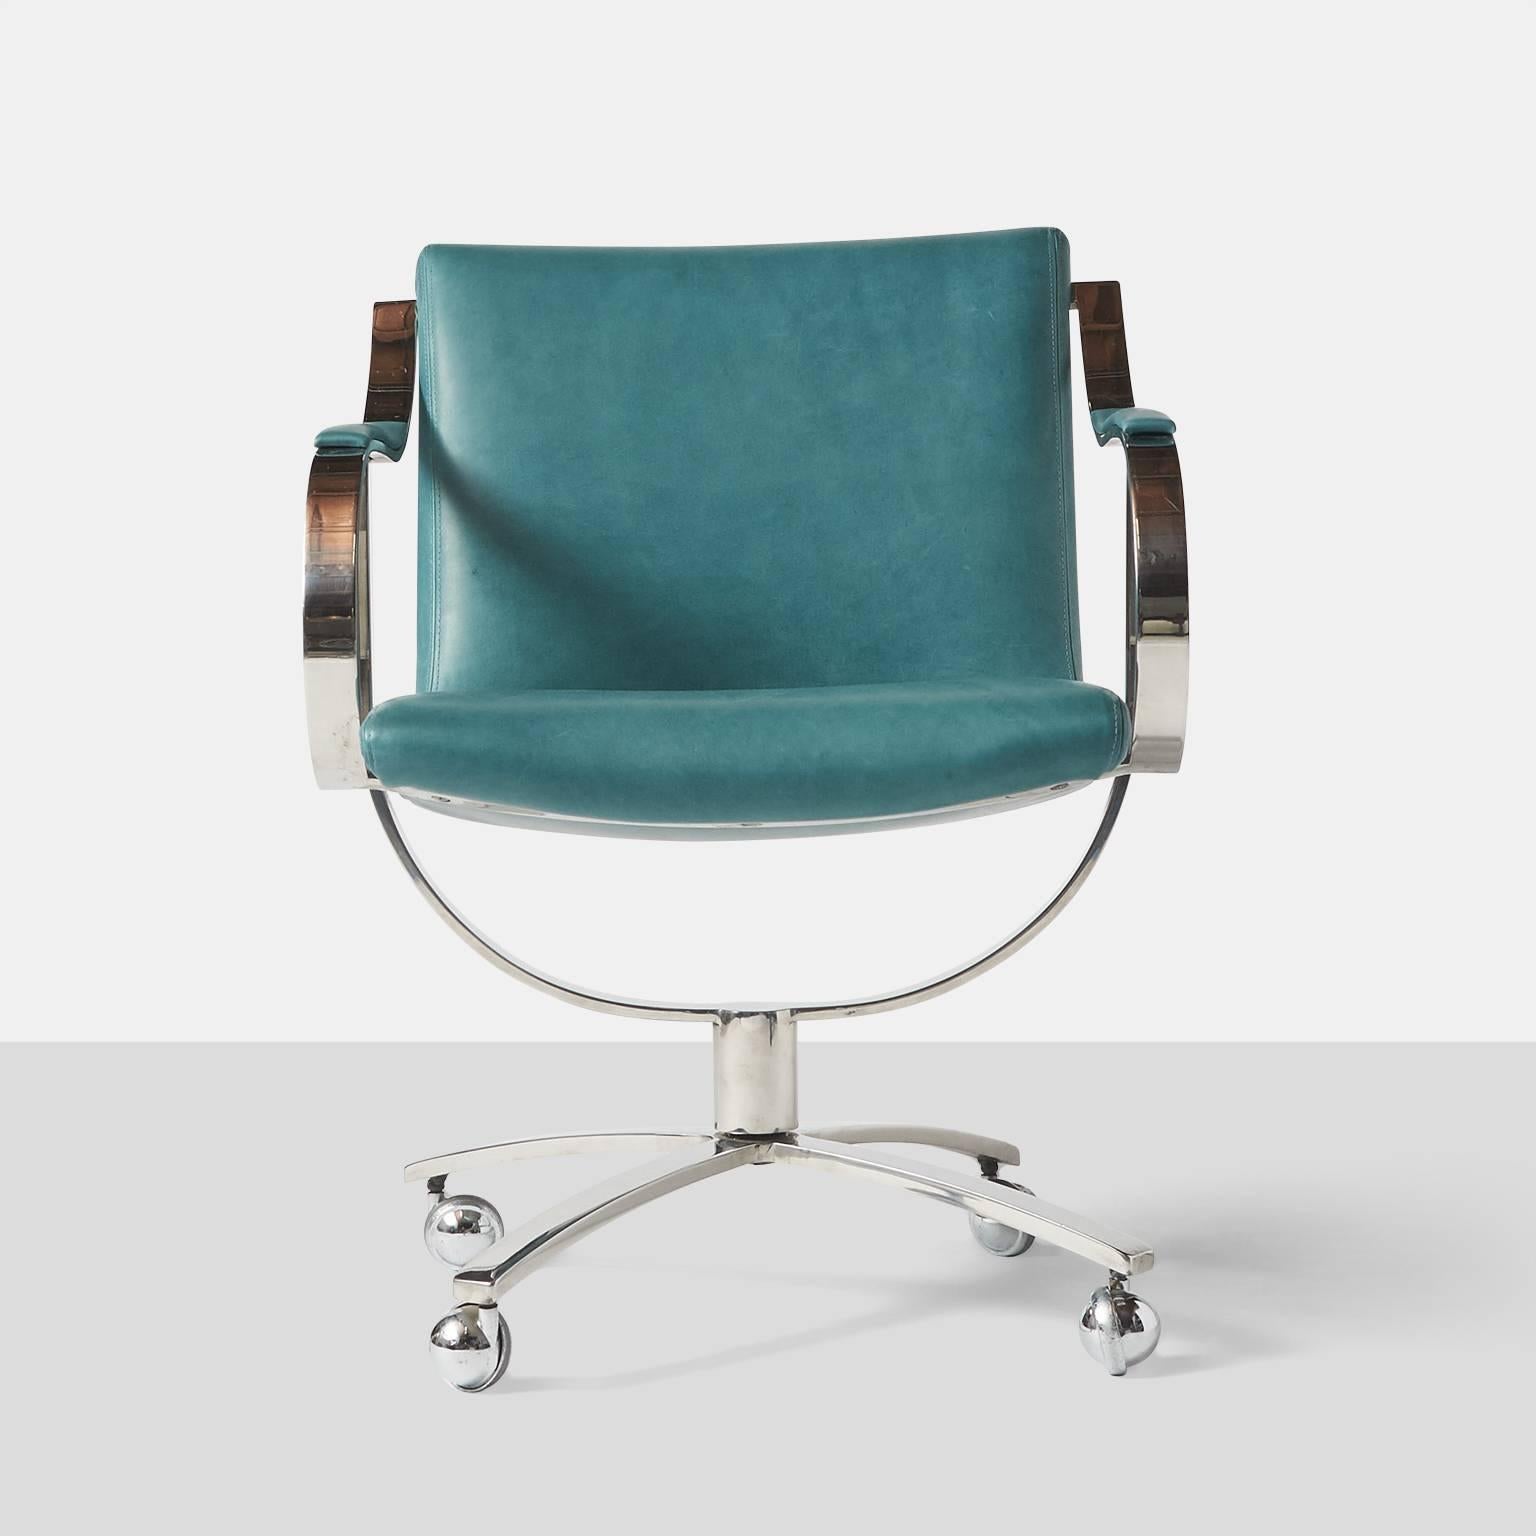 American Swivel Chairs by Gardner Leaver for Steelcase